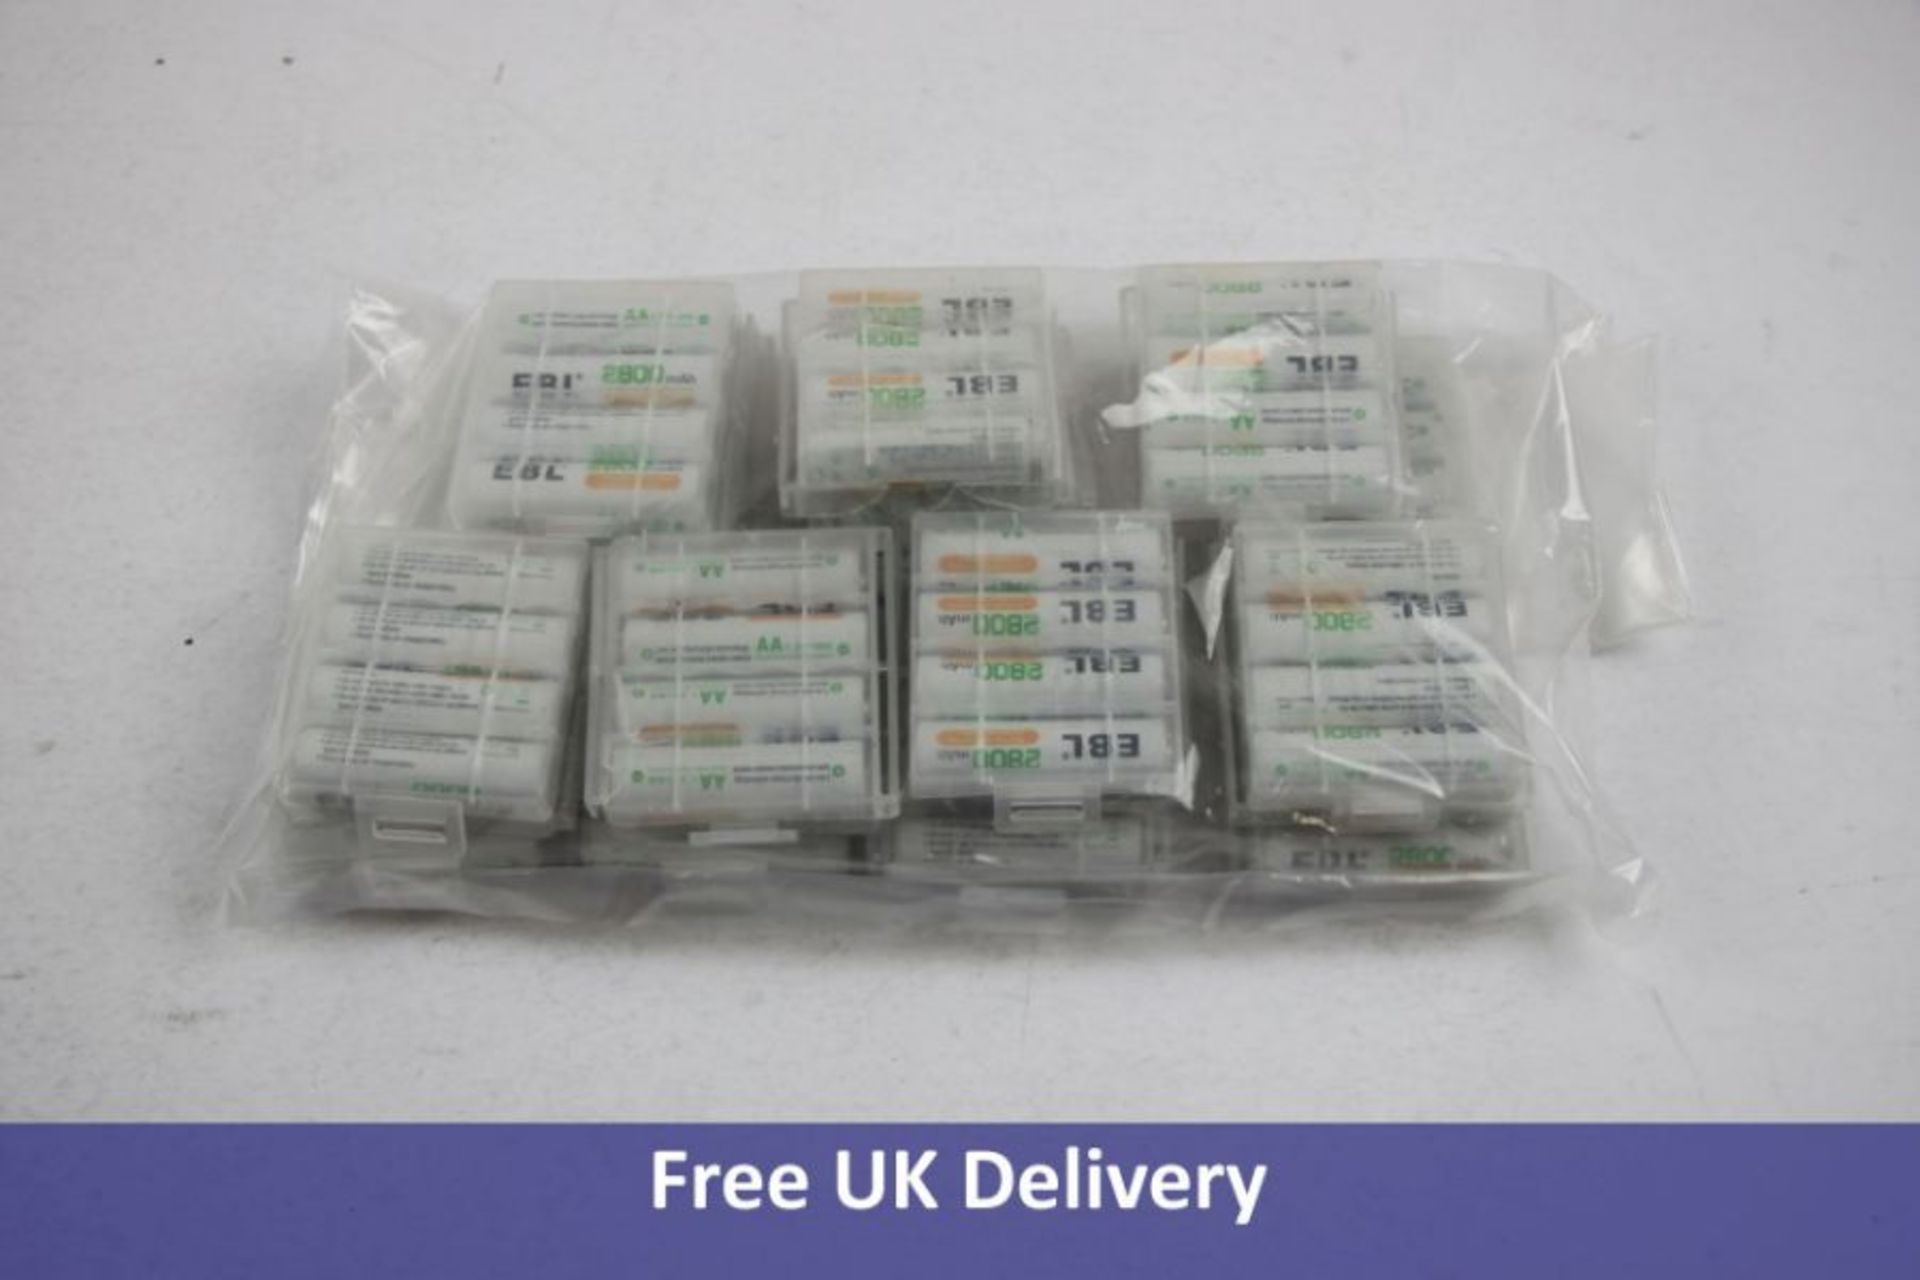 Fifty Six EBL AA Rechargeable Batteries 2800mAh. Boxes damaged